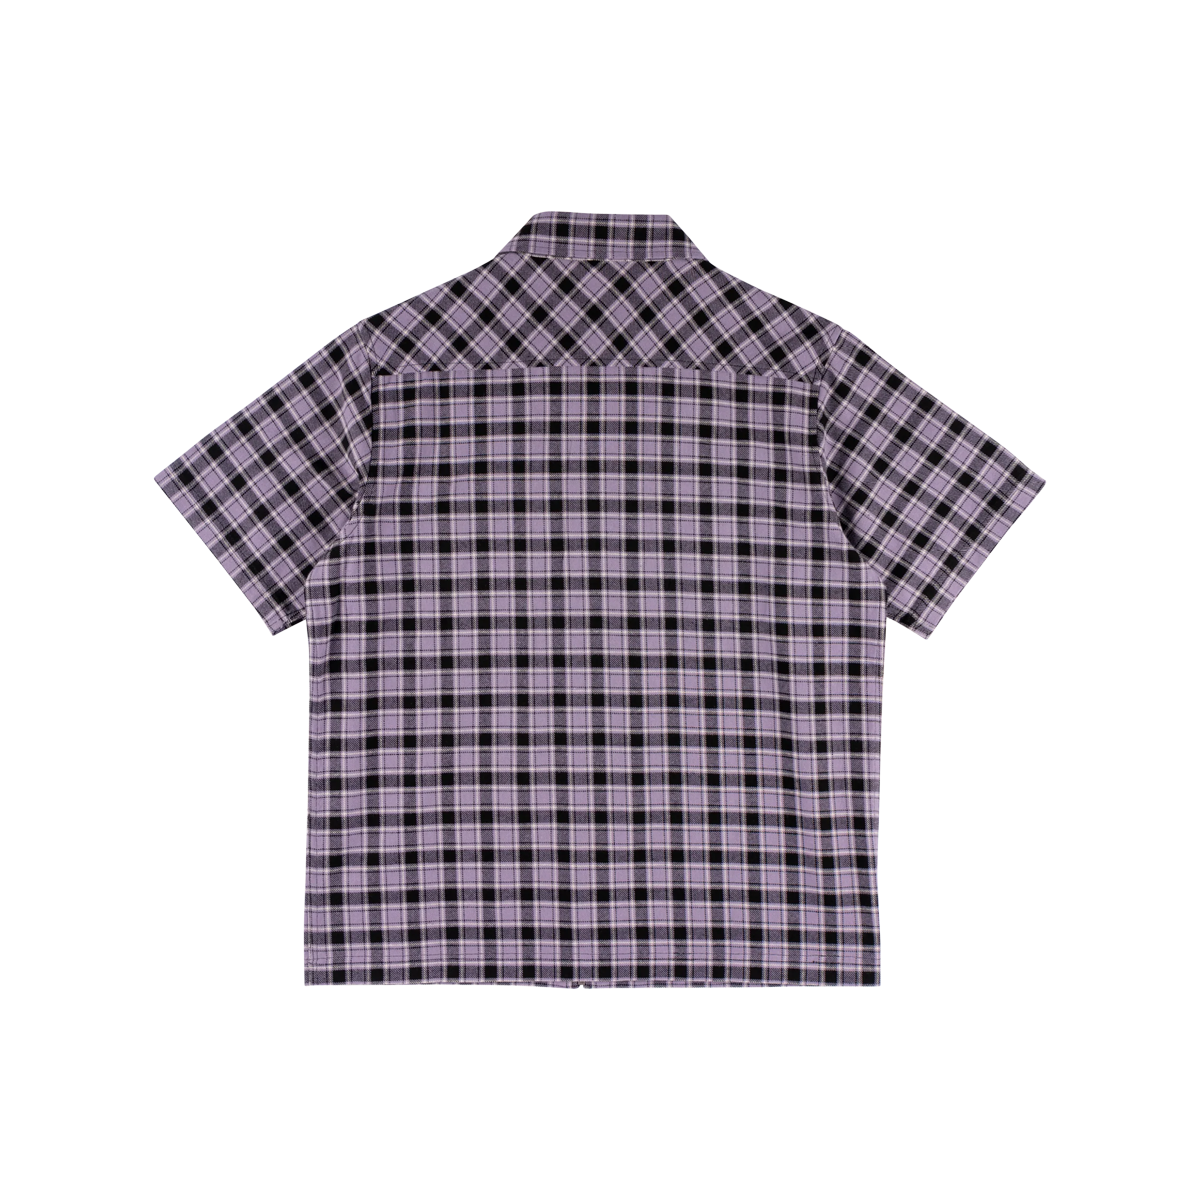 Welcome Cell Woven Plaid Zip Shirt - Lavender Grey